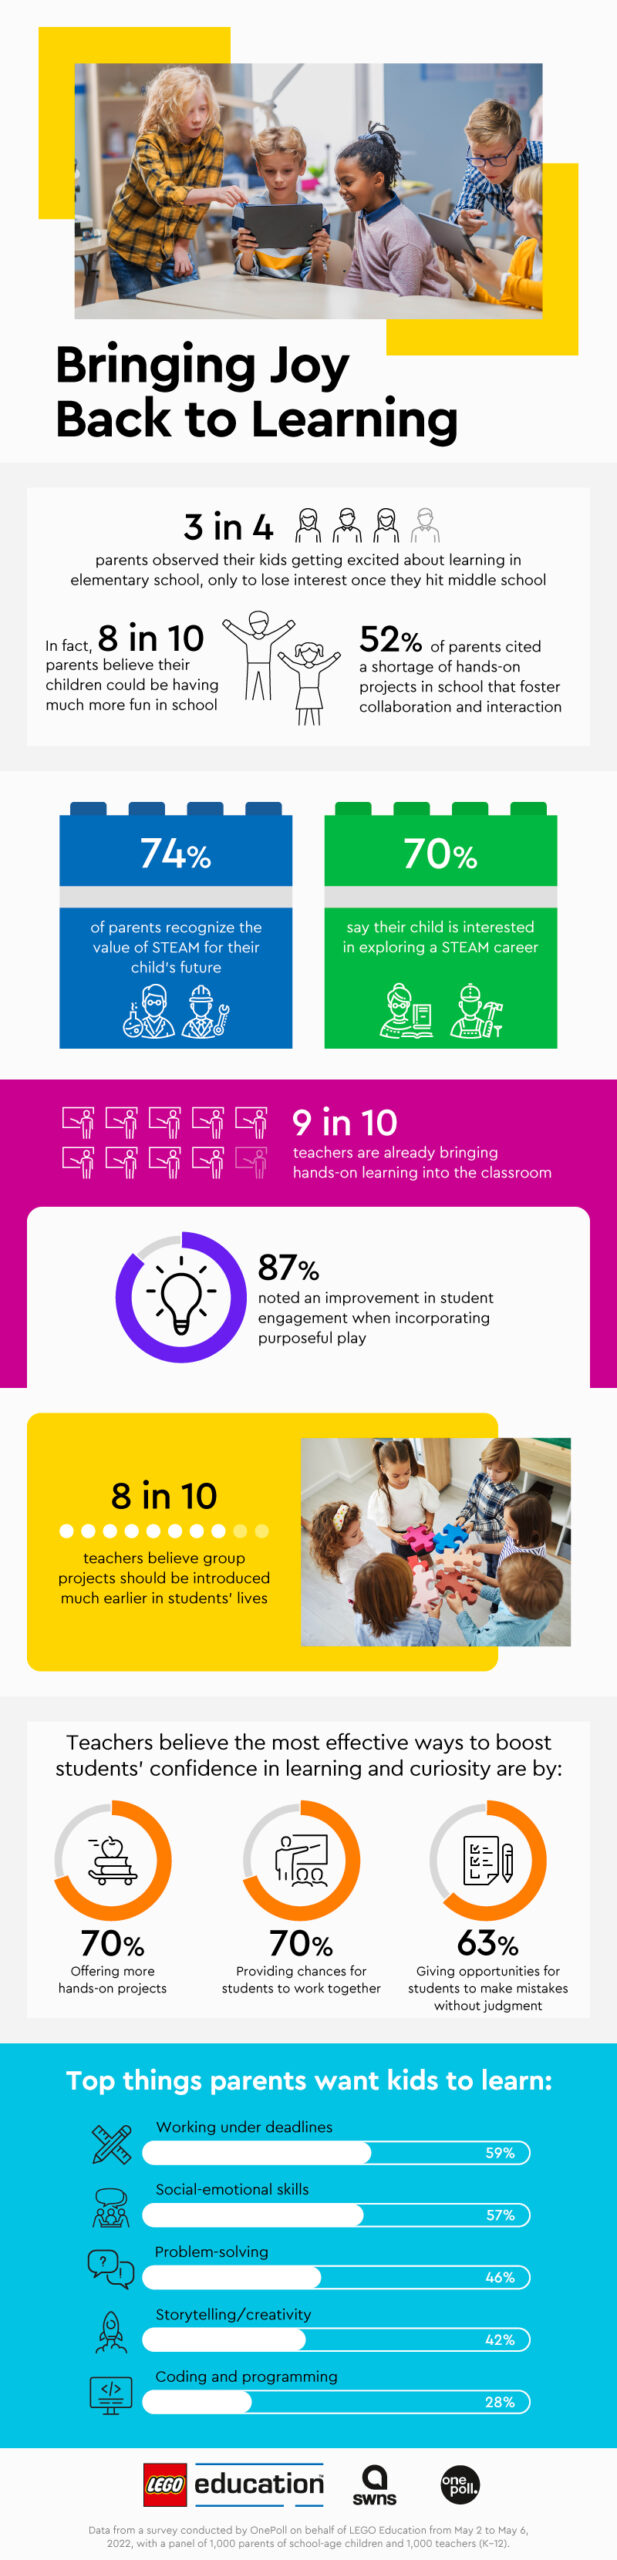 Gamification in Education Infographic